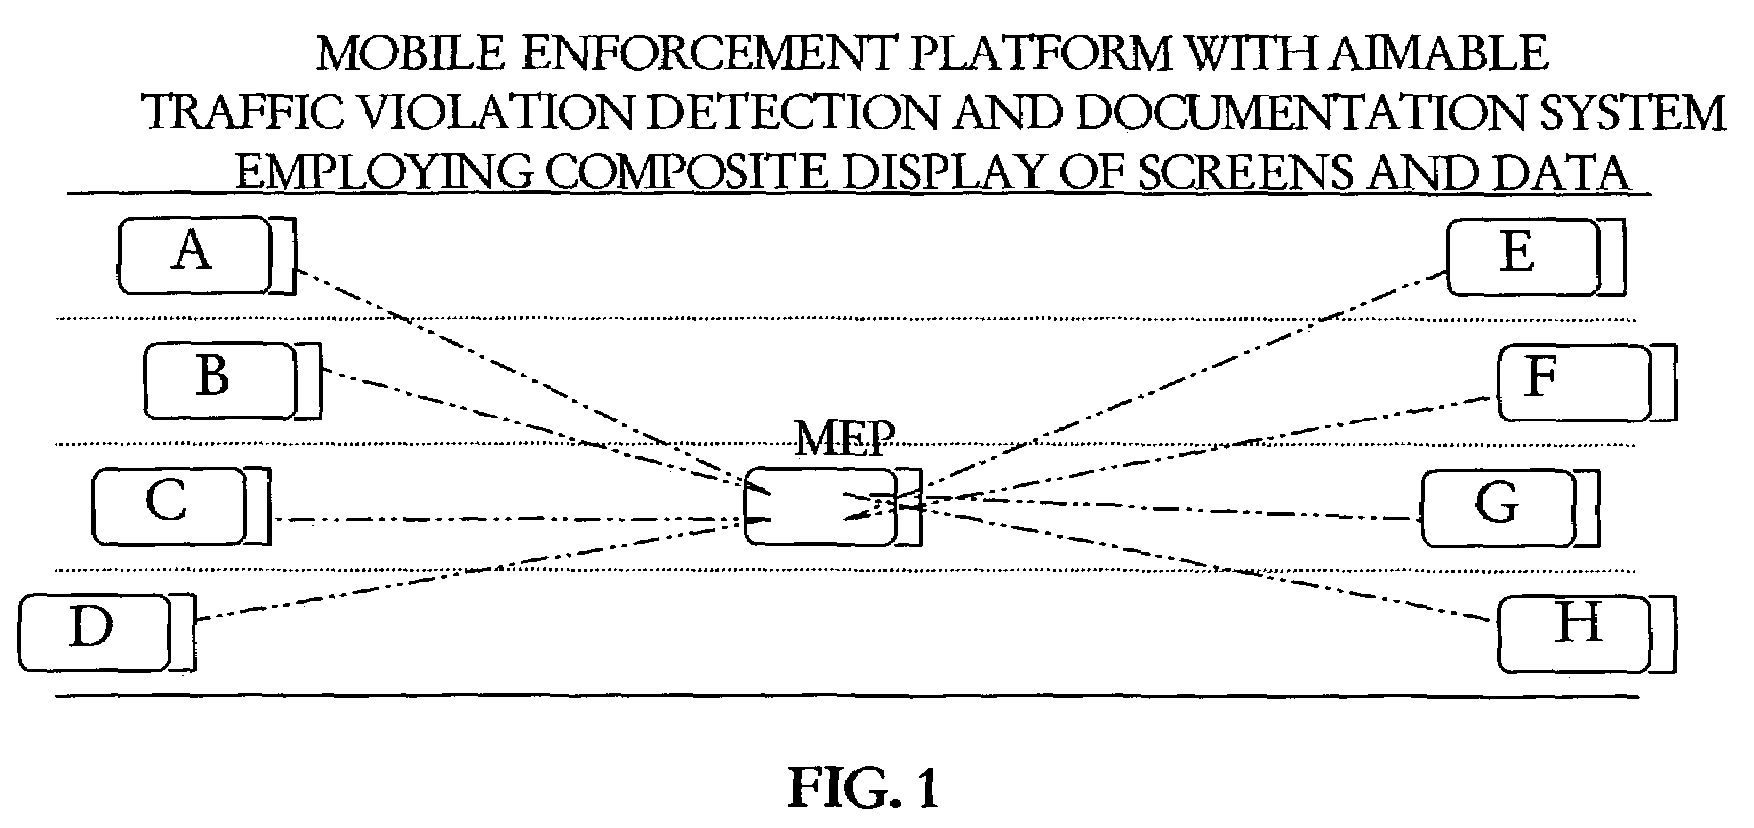 Mobile enforcement platform with aimable violation identification and documentation system for multiple traffic violation types across all lanes in moving traffic, generating composite display images and data to support citation generation, homeland security, and monitoring